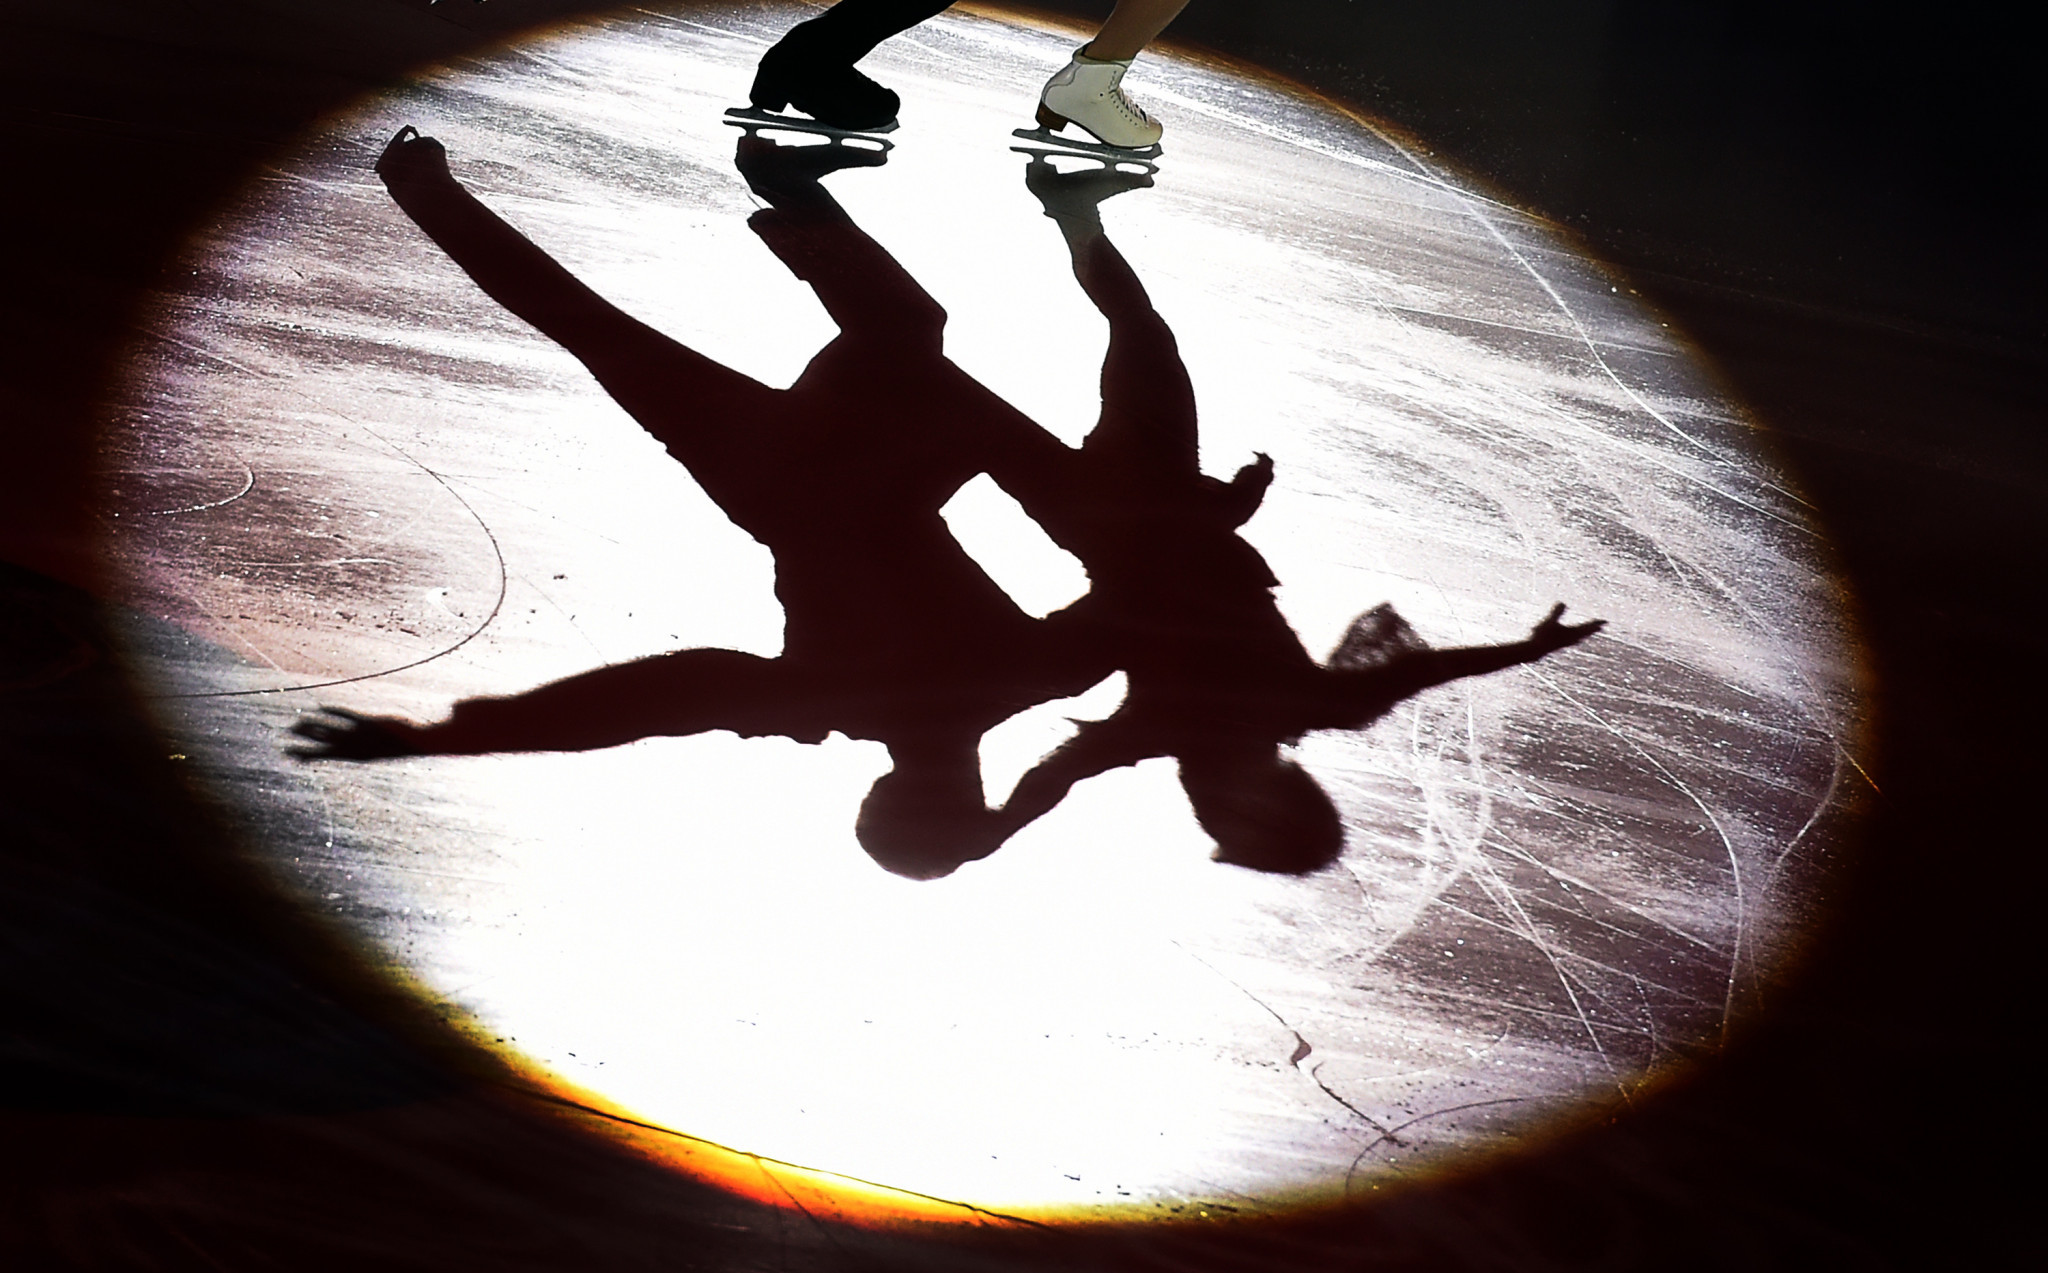 The ISU Junior Grand Prix of Figure Skating in Yerevan has been cancelled due to "prevailing uncertainty" in Armenia ©Getty Images